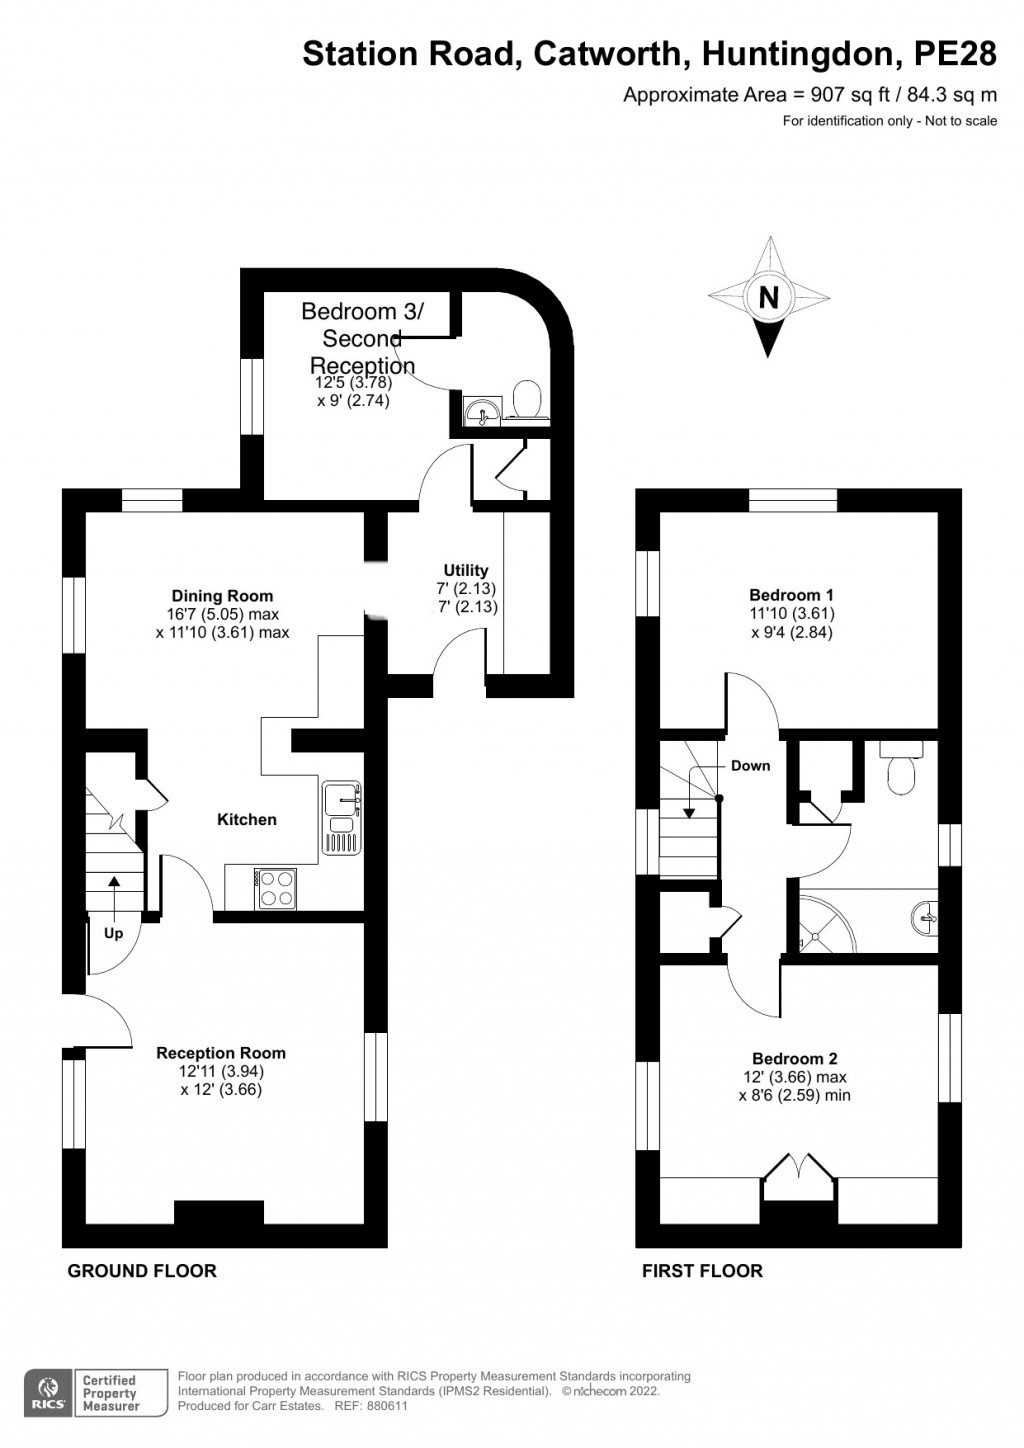 Floorplans For Tapestry Cottage, Station Road, Catworth